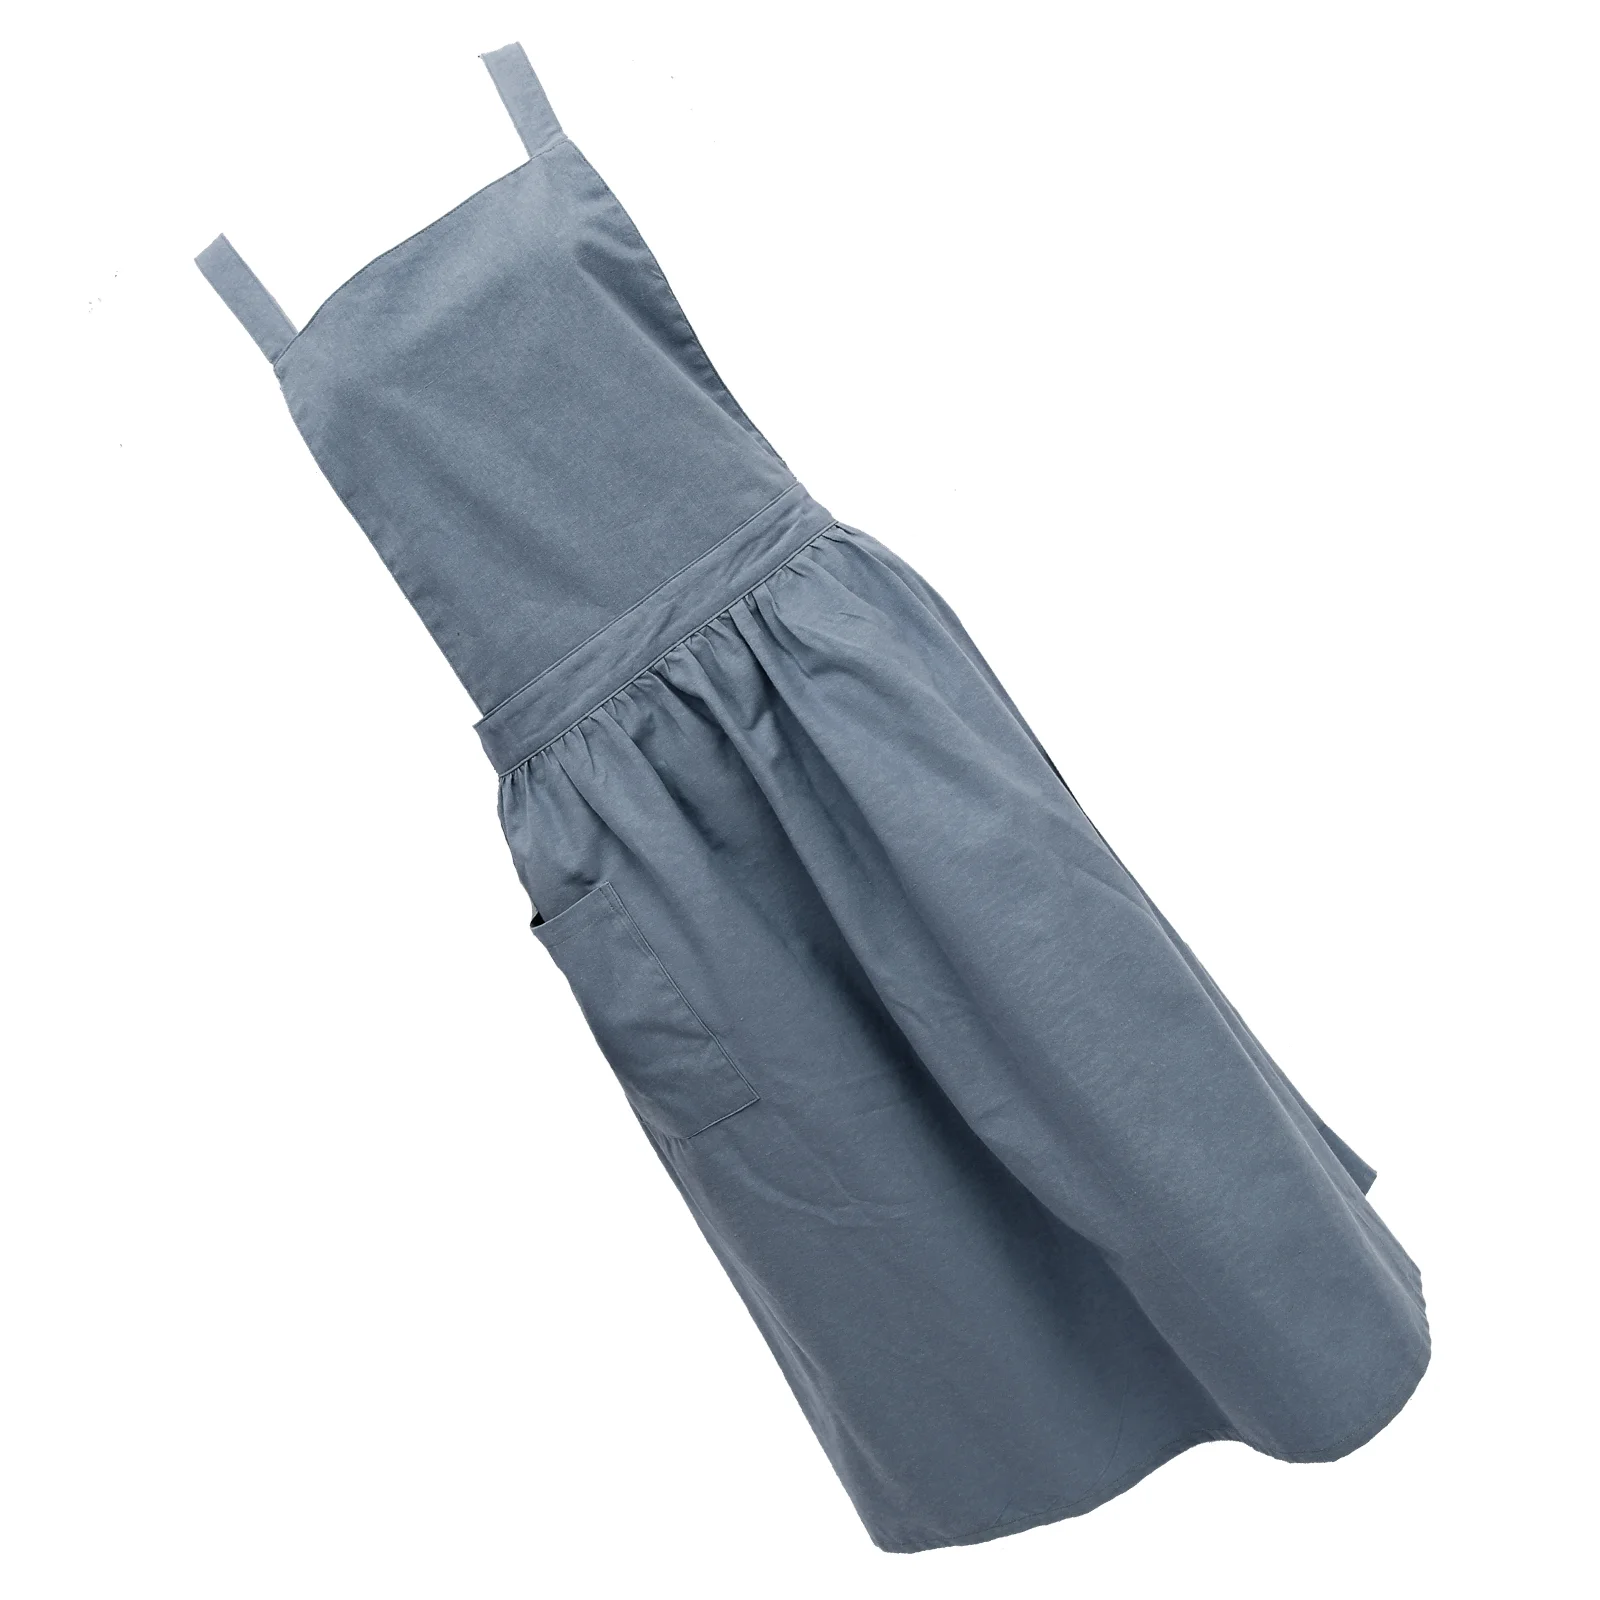 

Bakery Apron Cross Back Aprons For Women Literature Chef Working Cotton Linen Women's Cooking